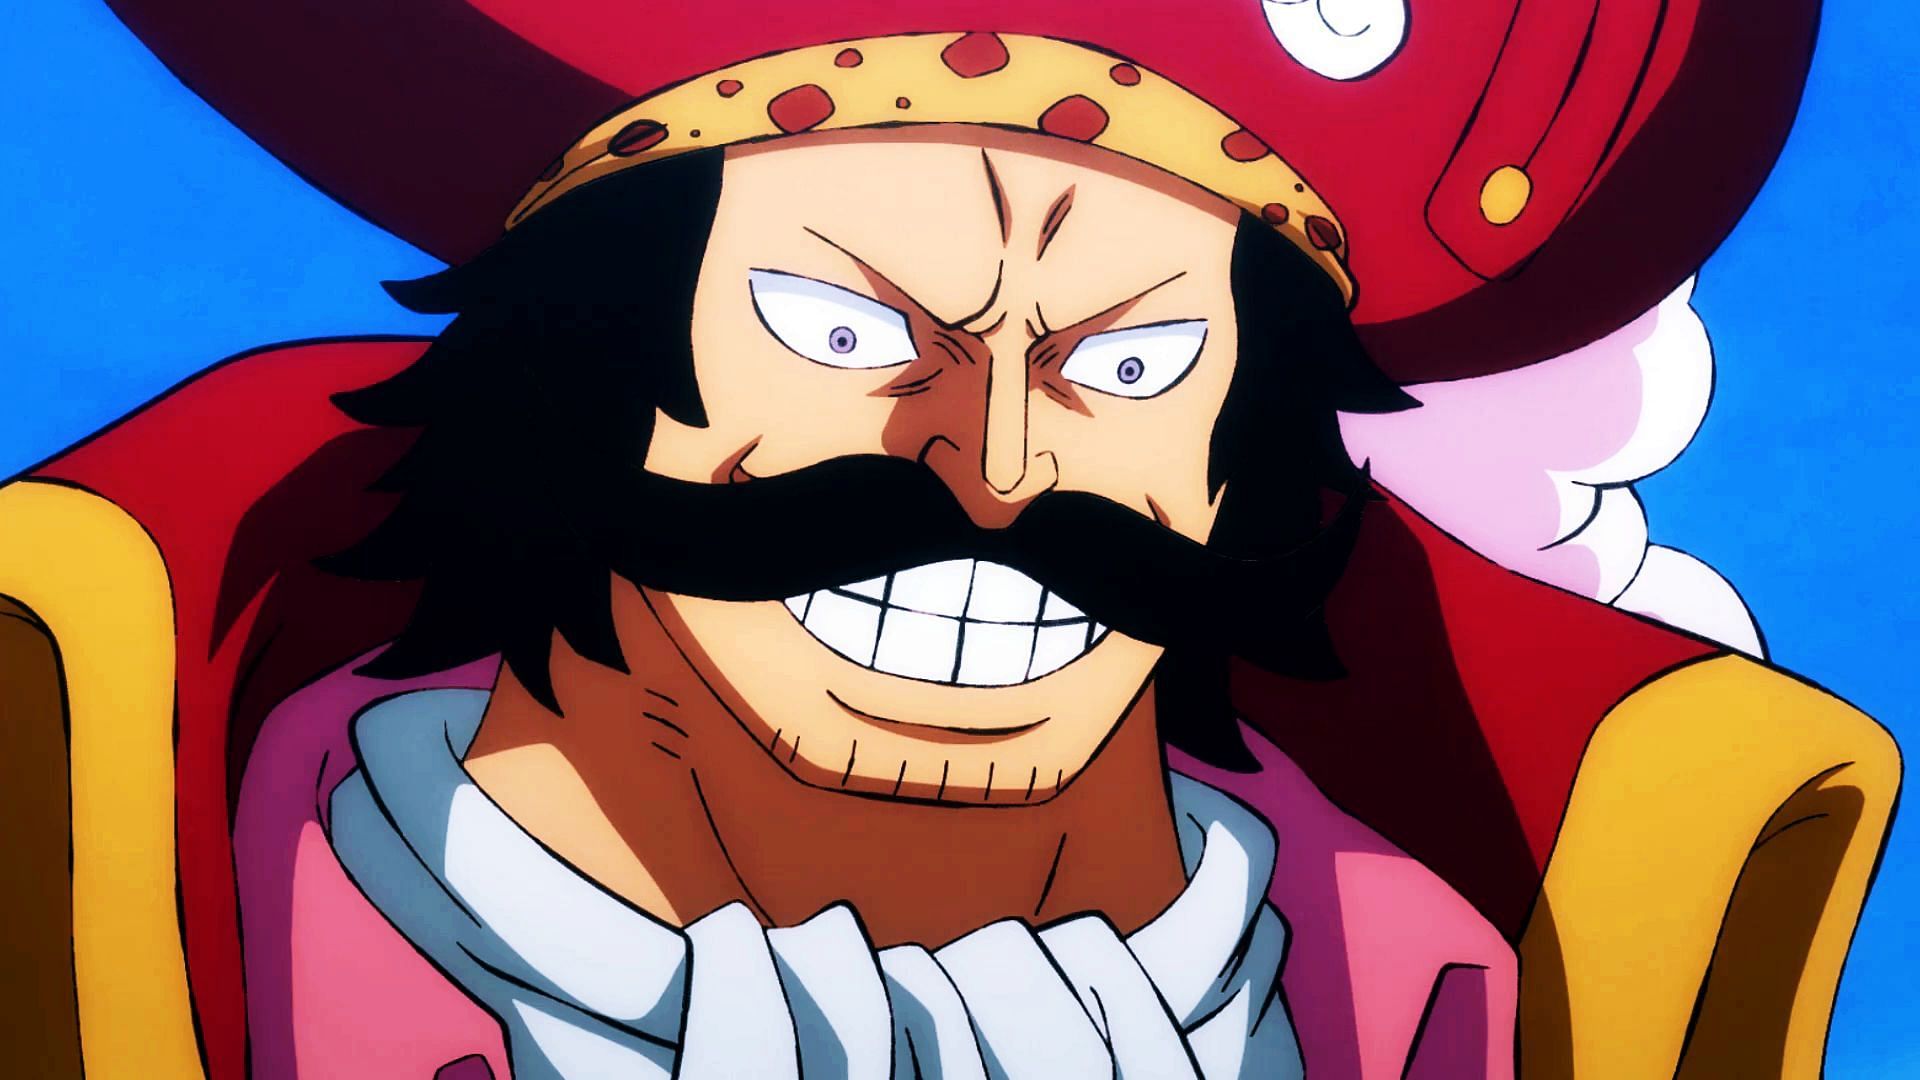 The legendary Pirate King is at the forefront of One Piece Chapter 1047 spoilers (Image Credits: Eiichiro Oda/Shueisha, Viz Media, One Piece)